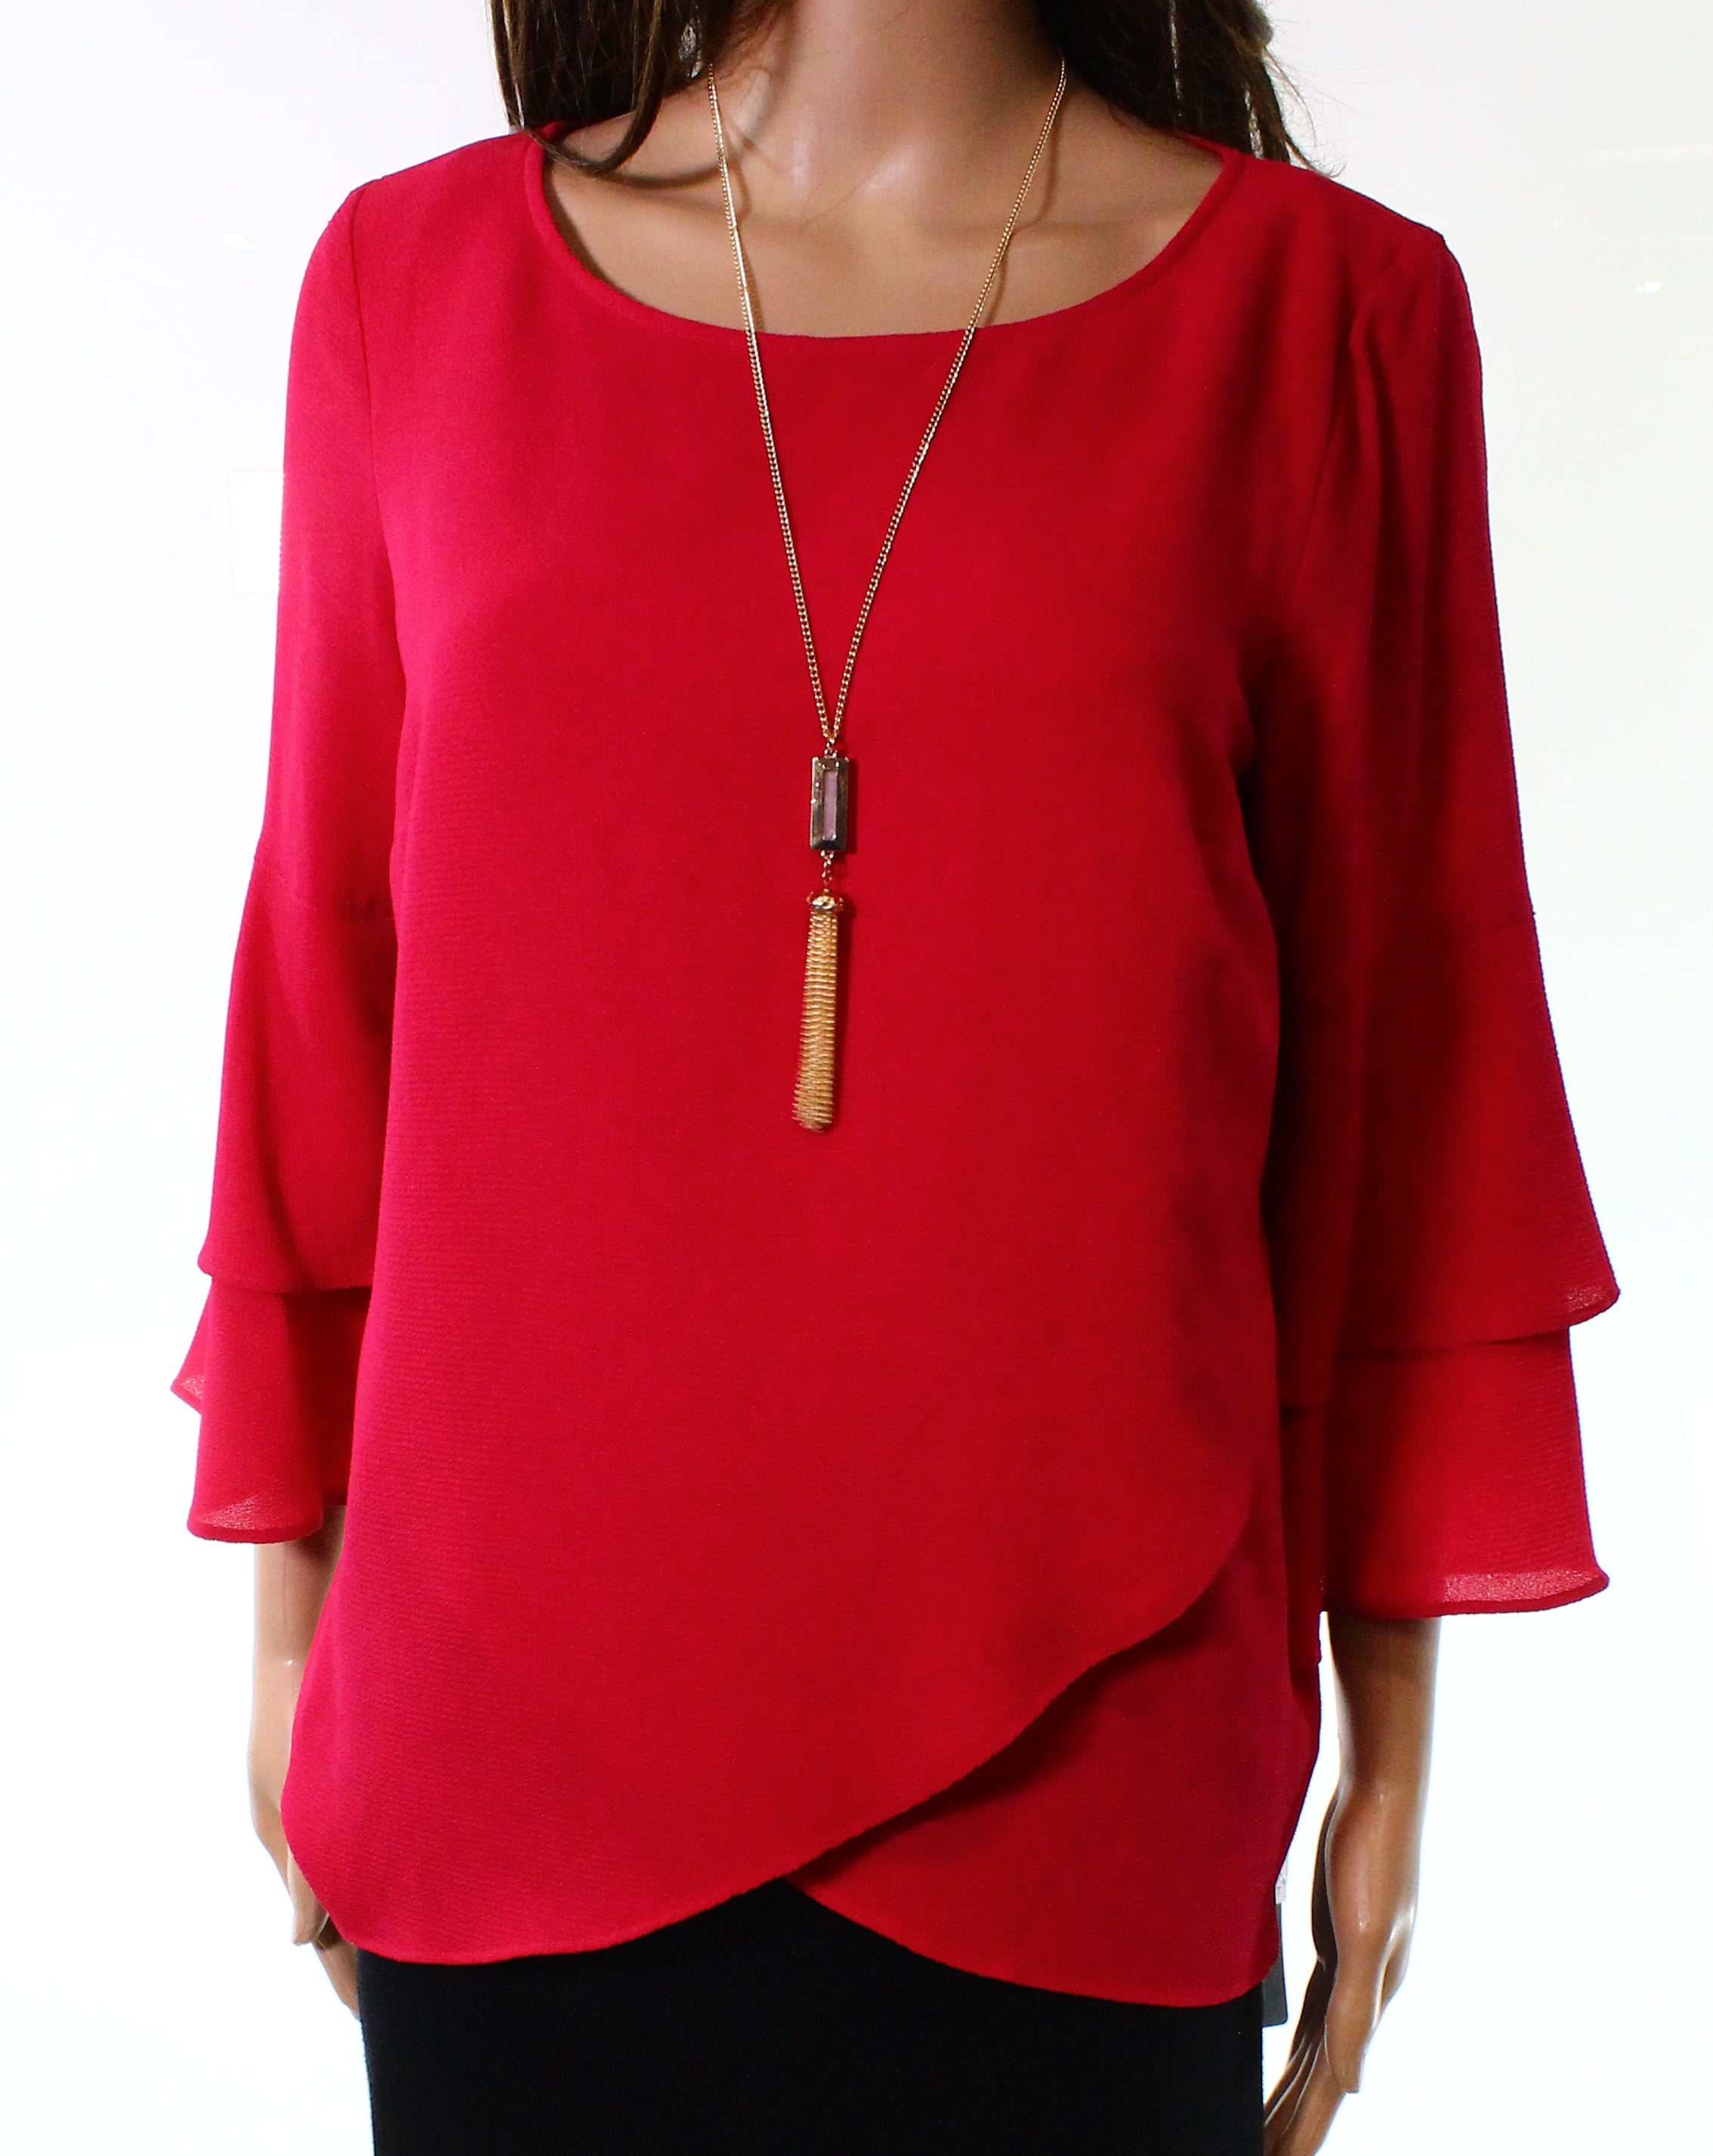 AGB Dresses - Womens Medium Petite Necklace Tiered Sleeve Blouse PM ...